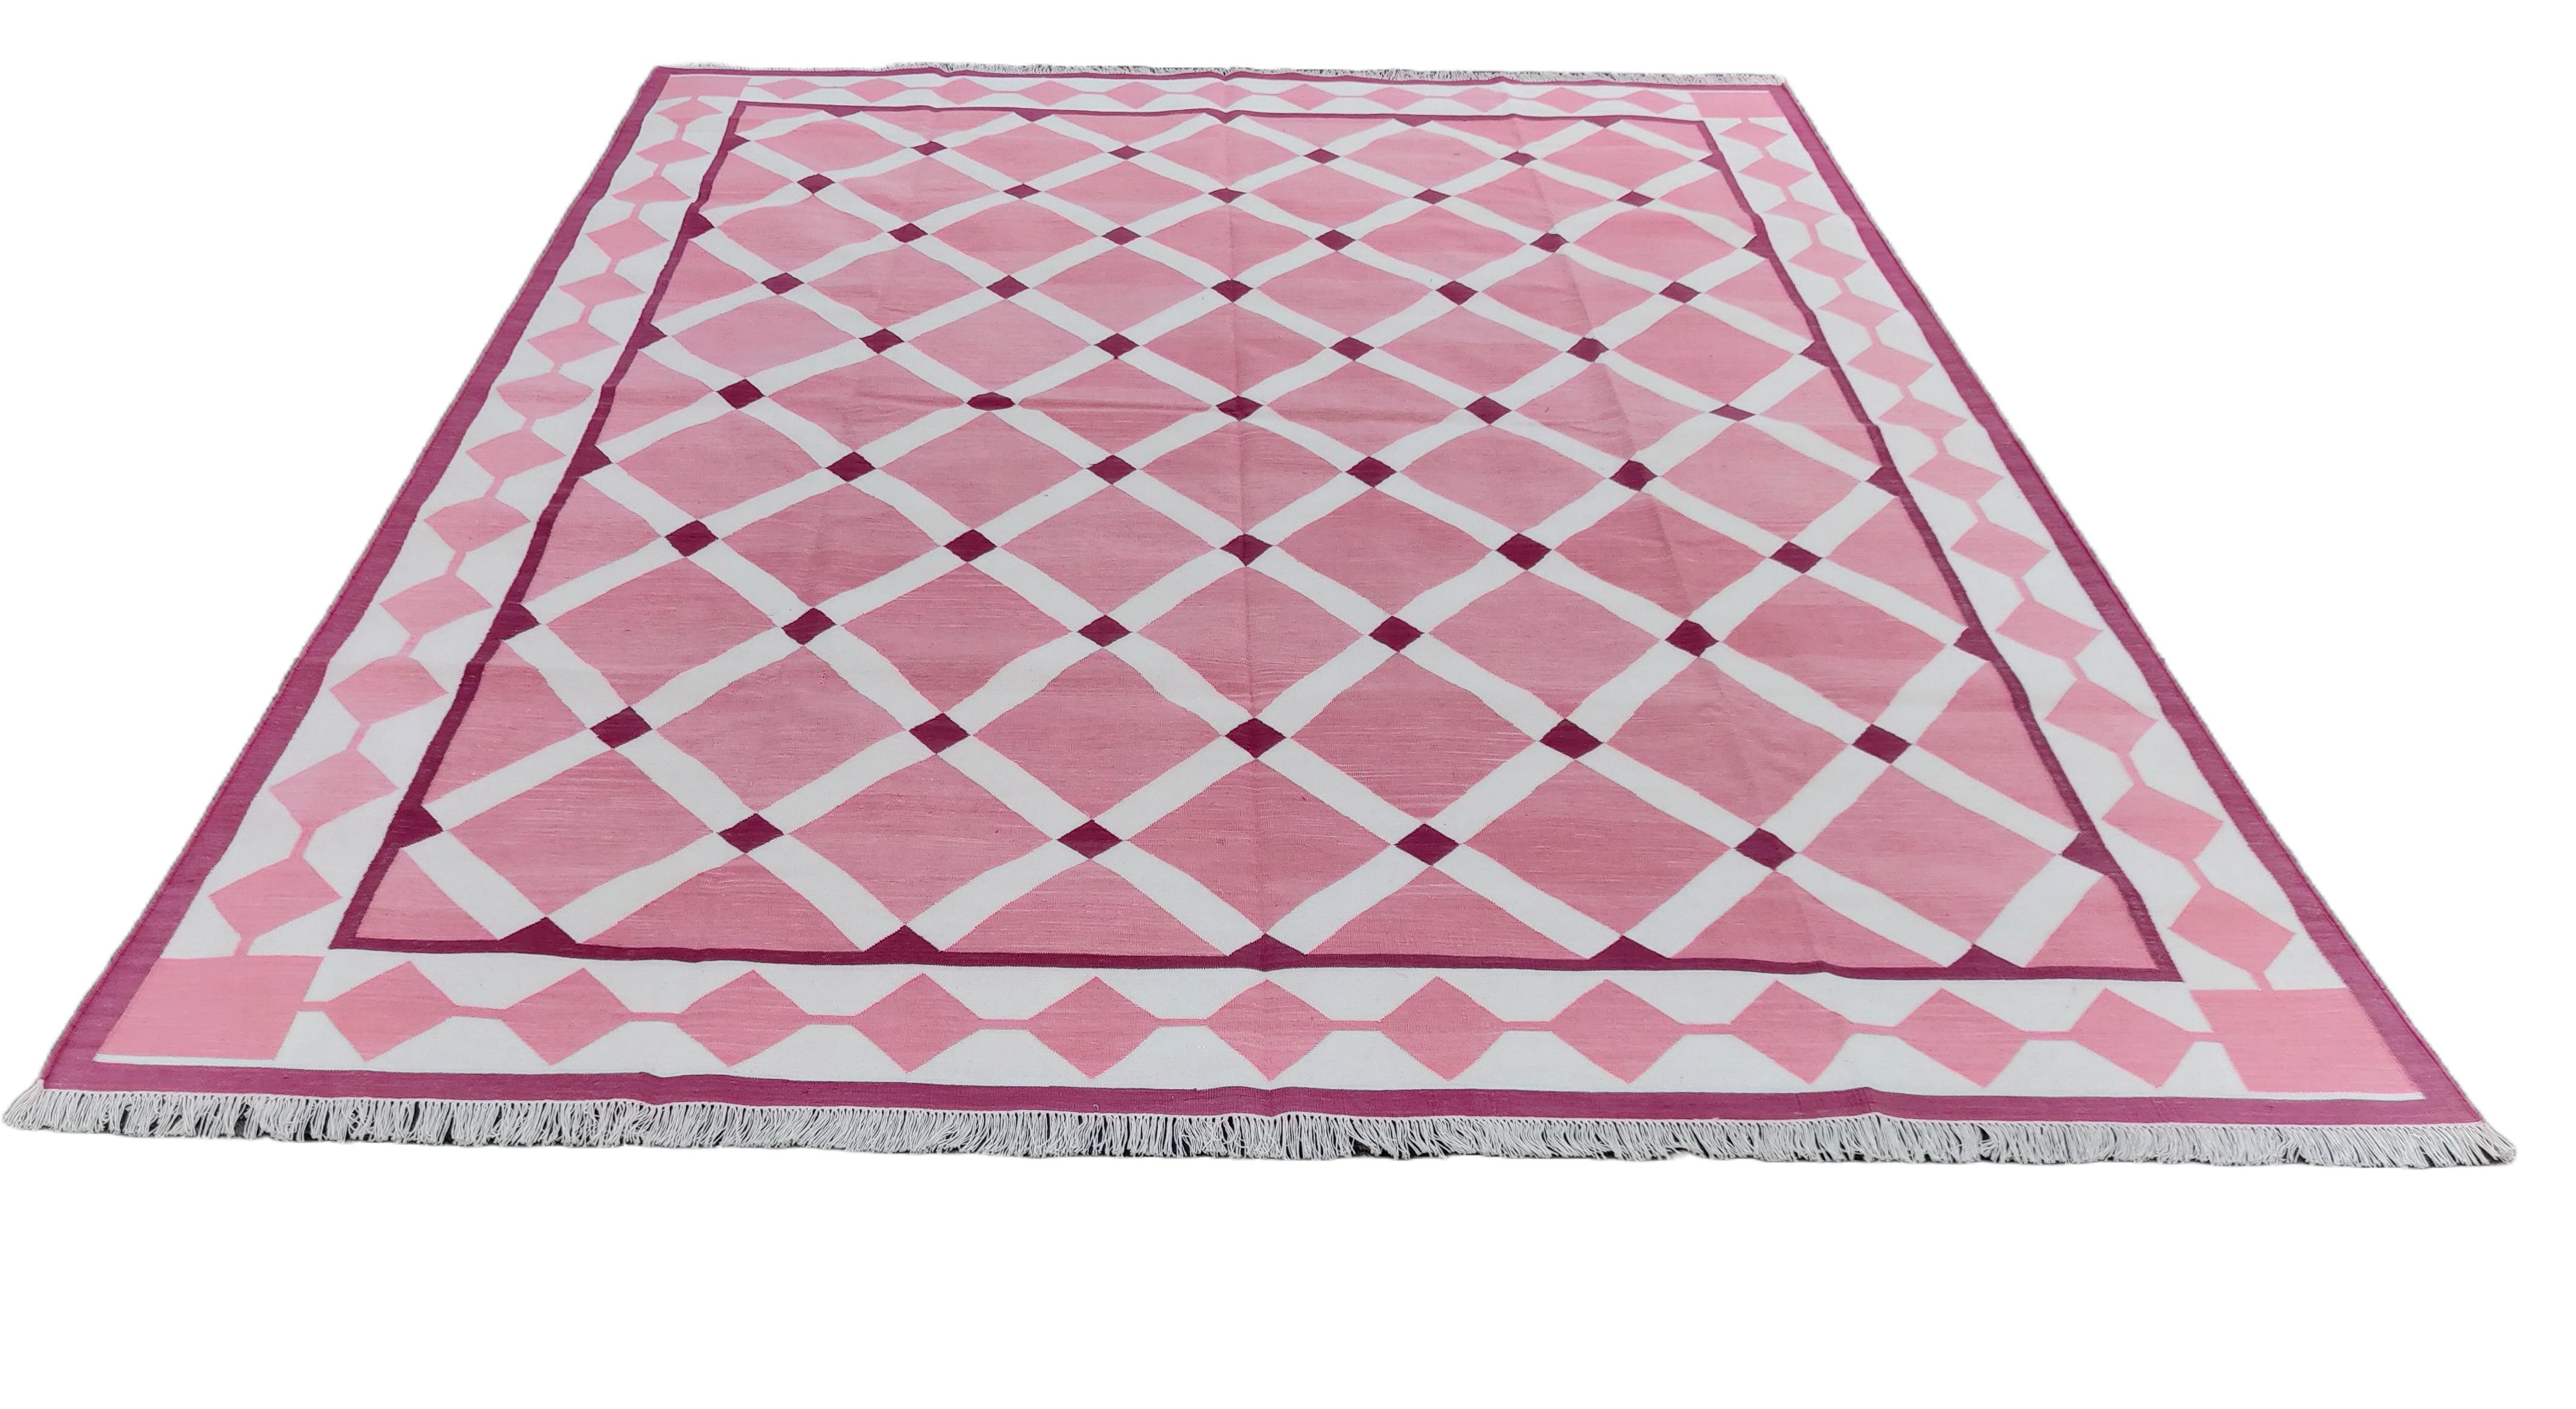 Contemporary Handmade Cotton Area Flat Weave Rug, 8x10 Pink Indian Star Geometric Dhurrie Rug For Sale